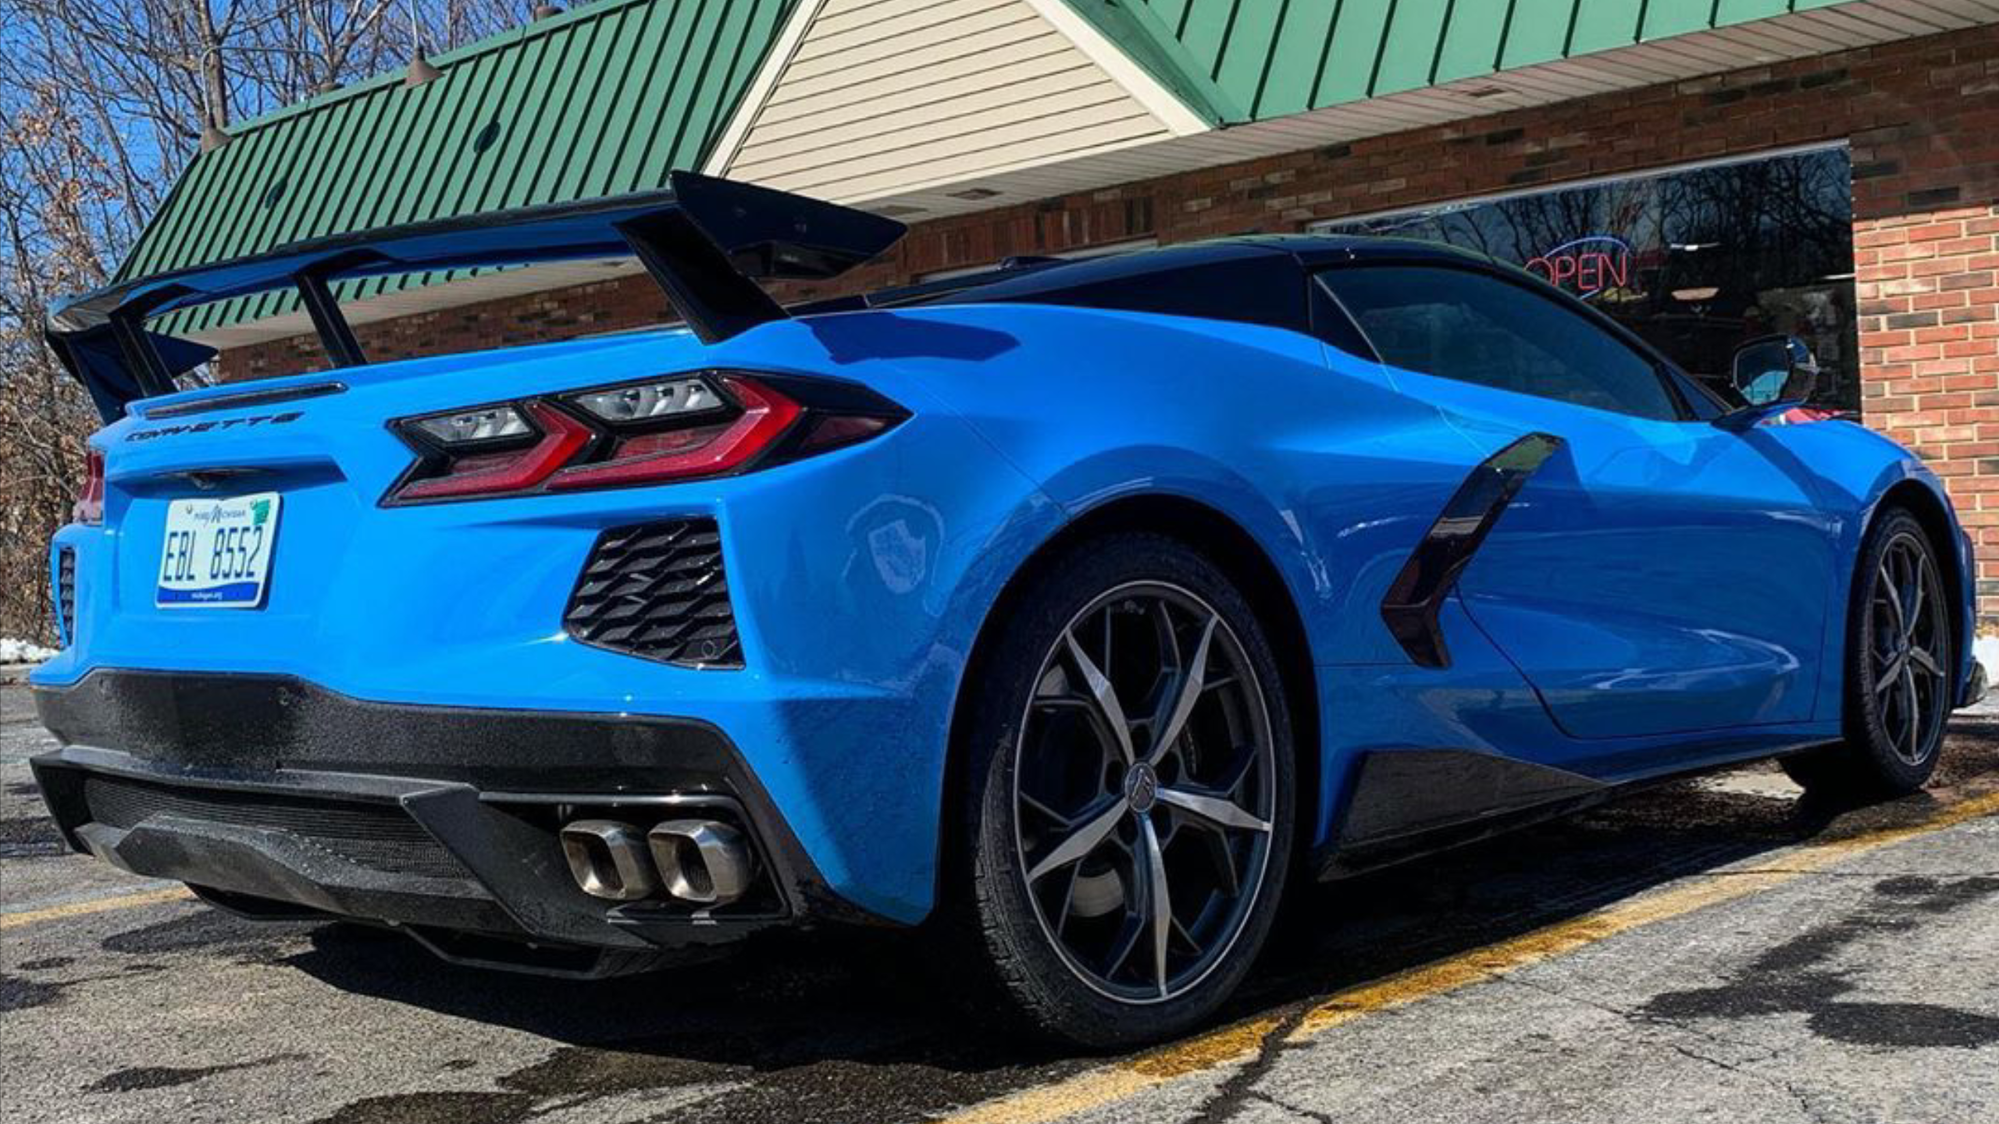 Corvette C8 Hard Top Convertible With A High Wing Spoiler